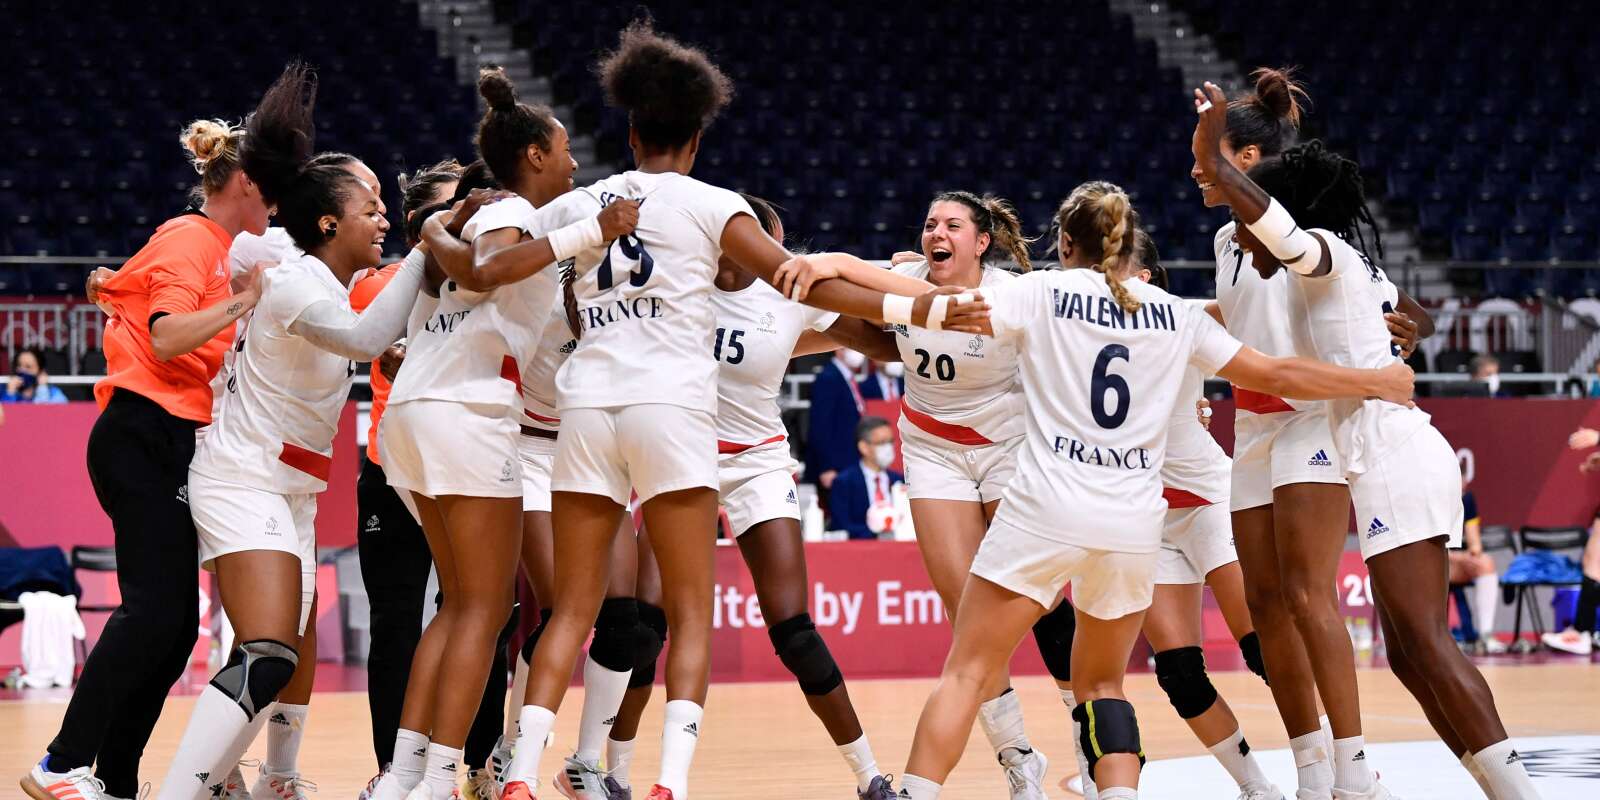 TOPSHOT - France's players celebrate their victory after the women's semifinal handball match between France and Sweden of the Tokyo 2020 Olympic Games at the Yoyogi National Stadium in Tokyo on August 6, 2021. (Photo by Fabrice COFFRINI / AFP)